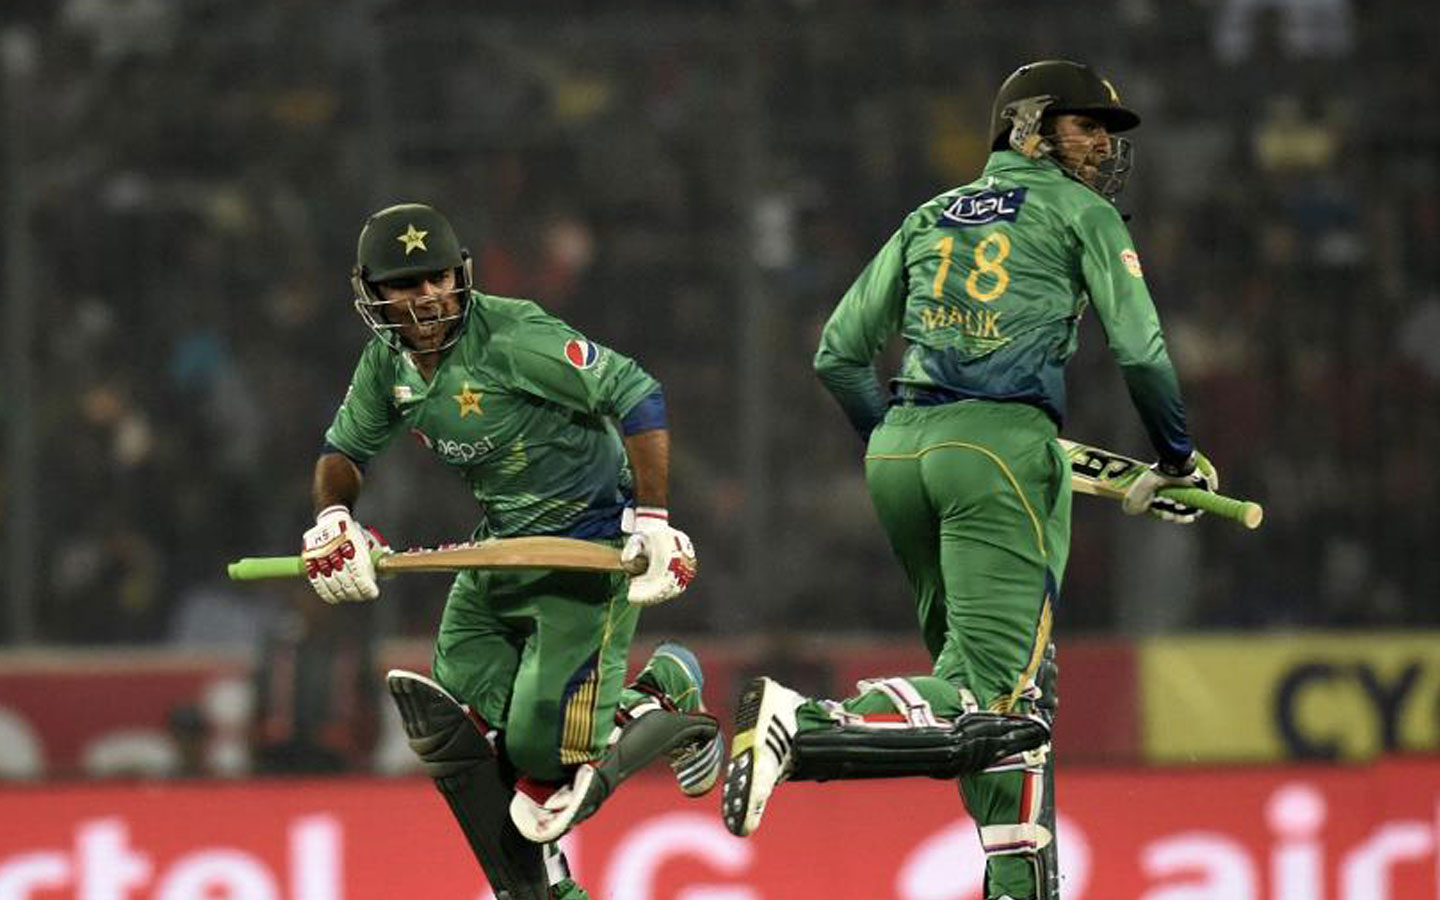 Sarfraz blasts career-best 89 to lead Pakistan over Scotland in first T20